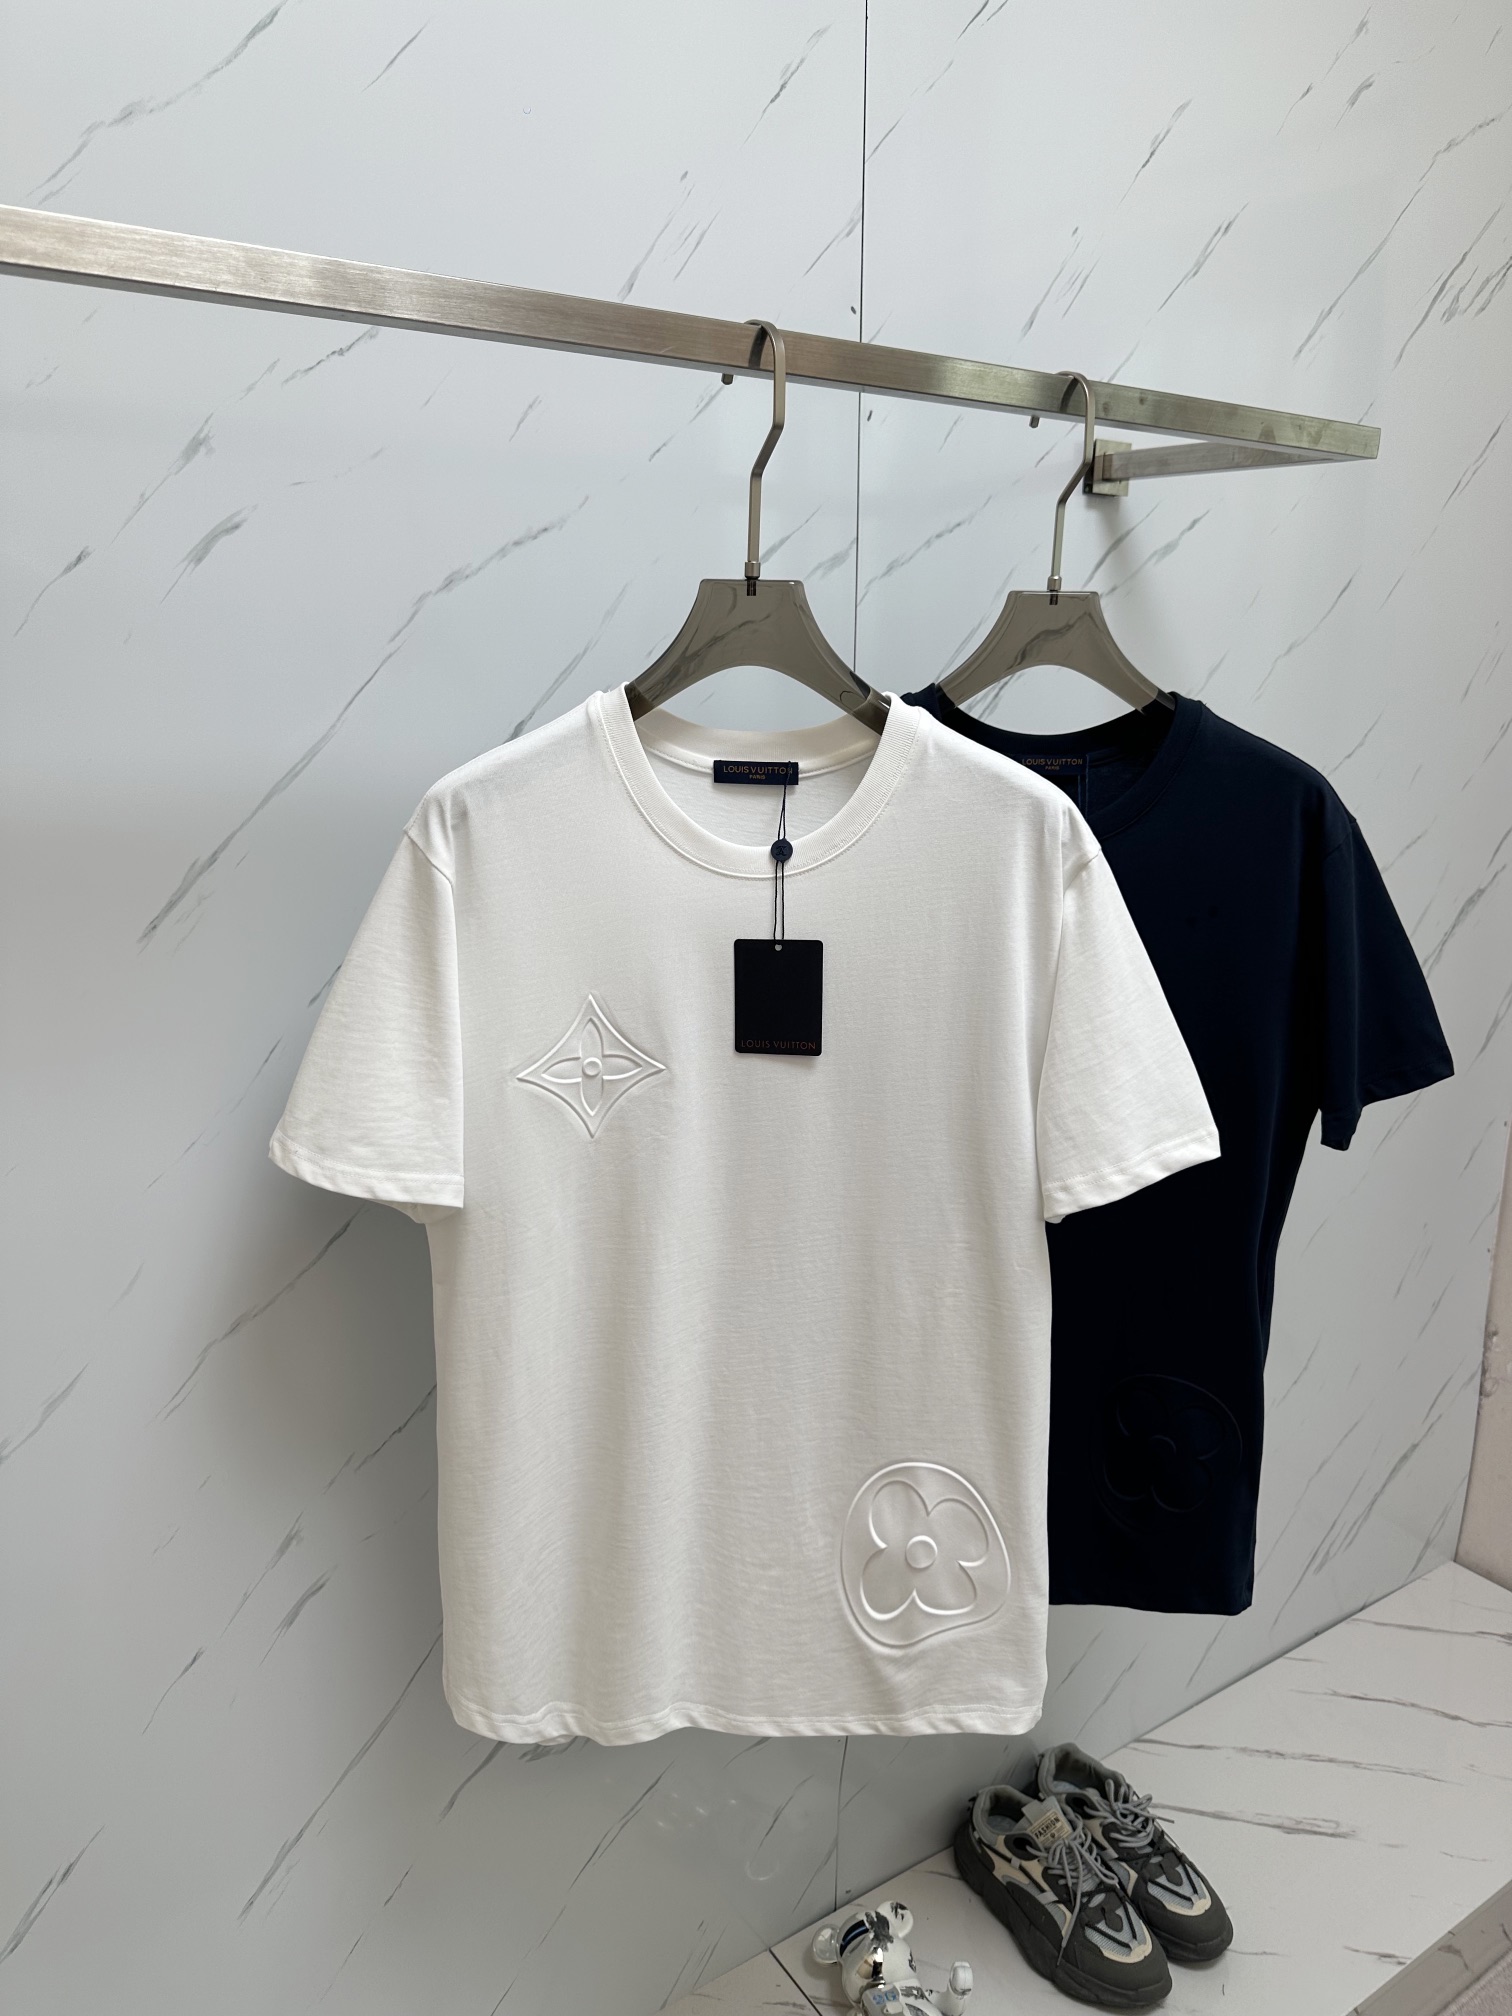 Louis Vuitton Clothing T-Shirt Embroidery Unisex Cotton Spring/Summer Collection Fashion Short Sleeve